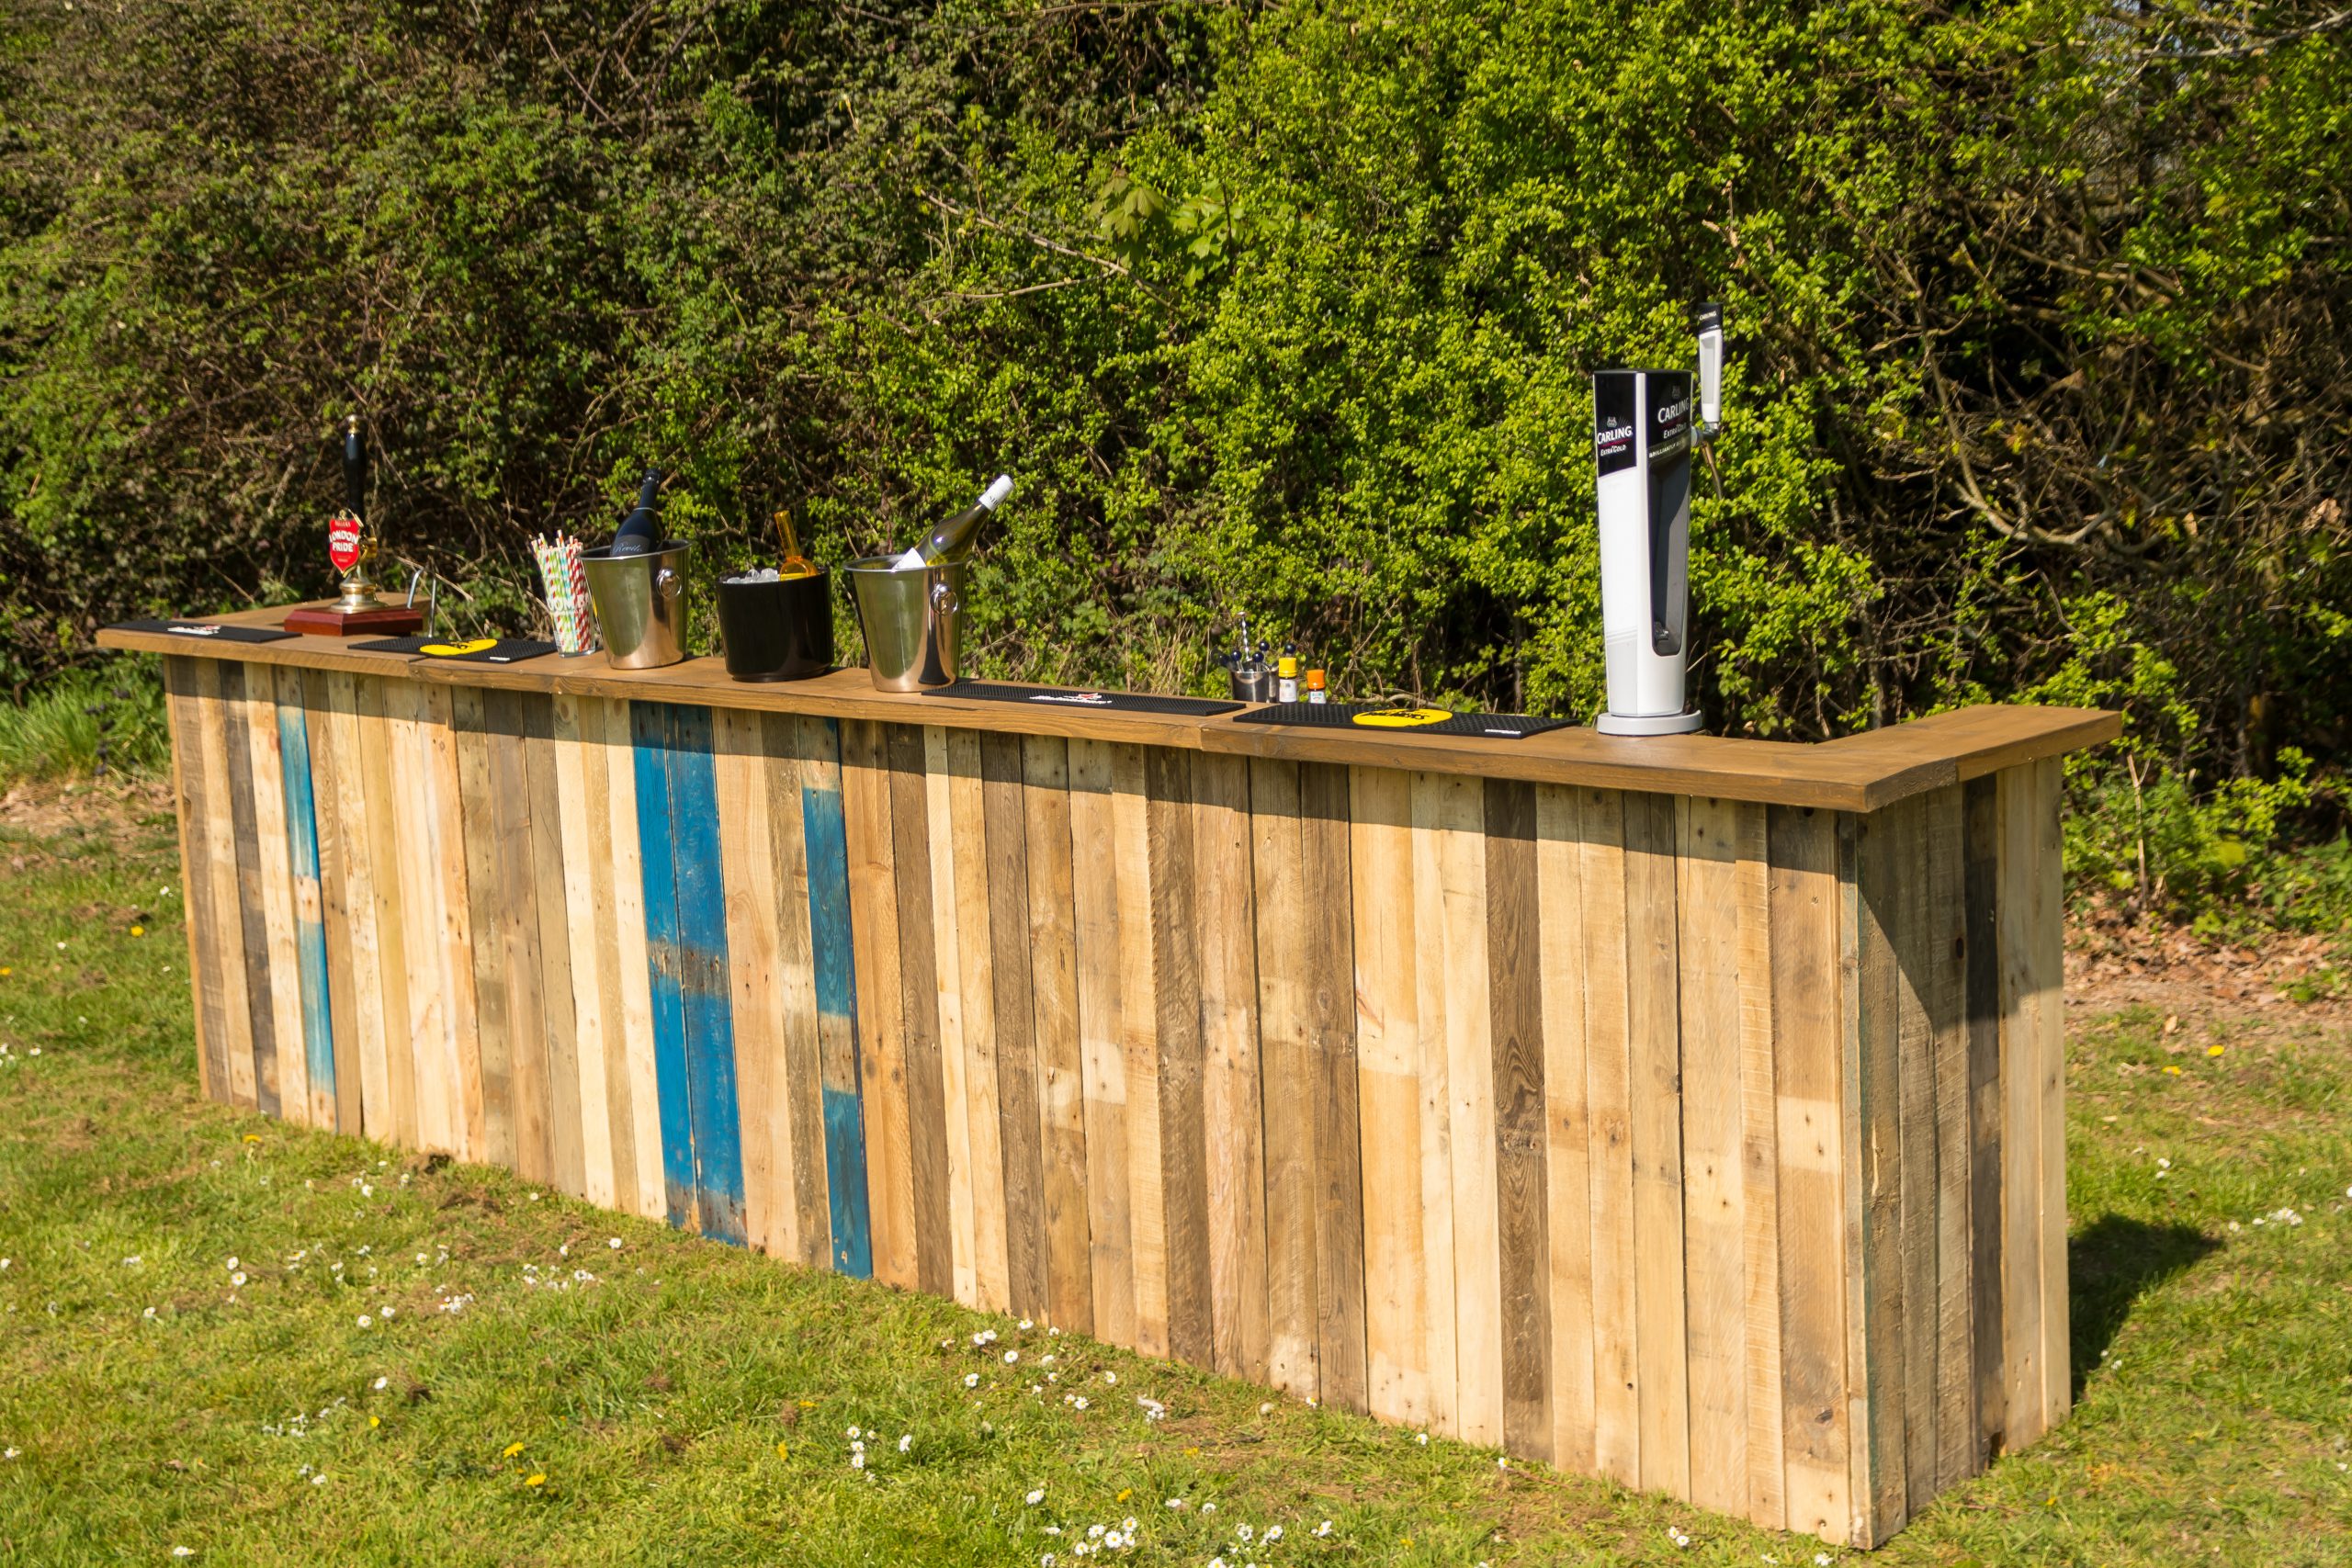 Rustic bars to hire